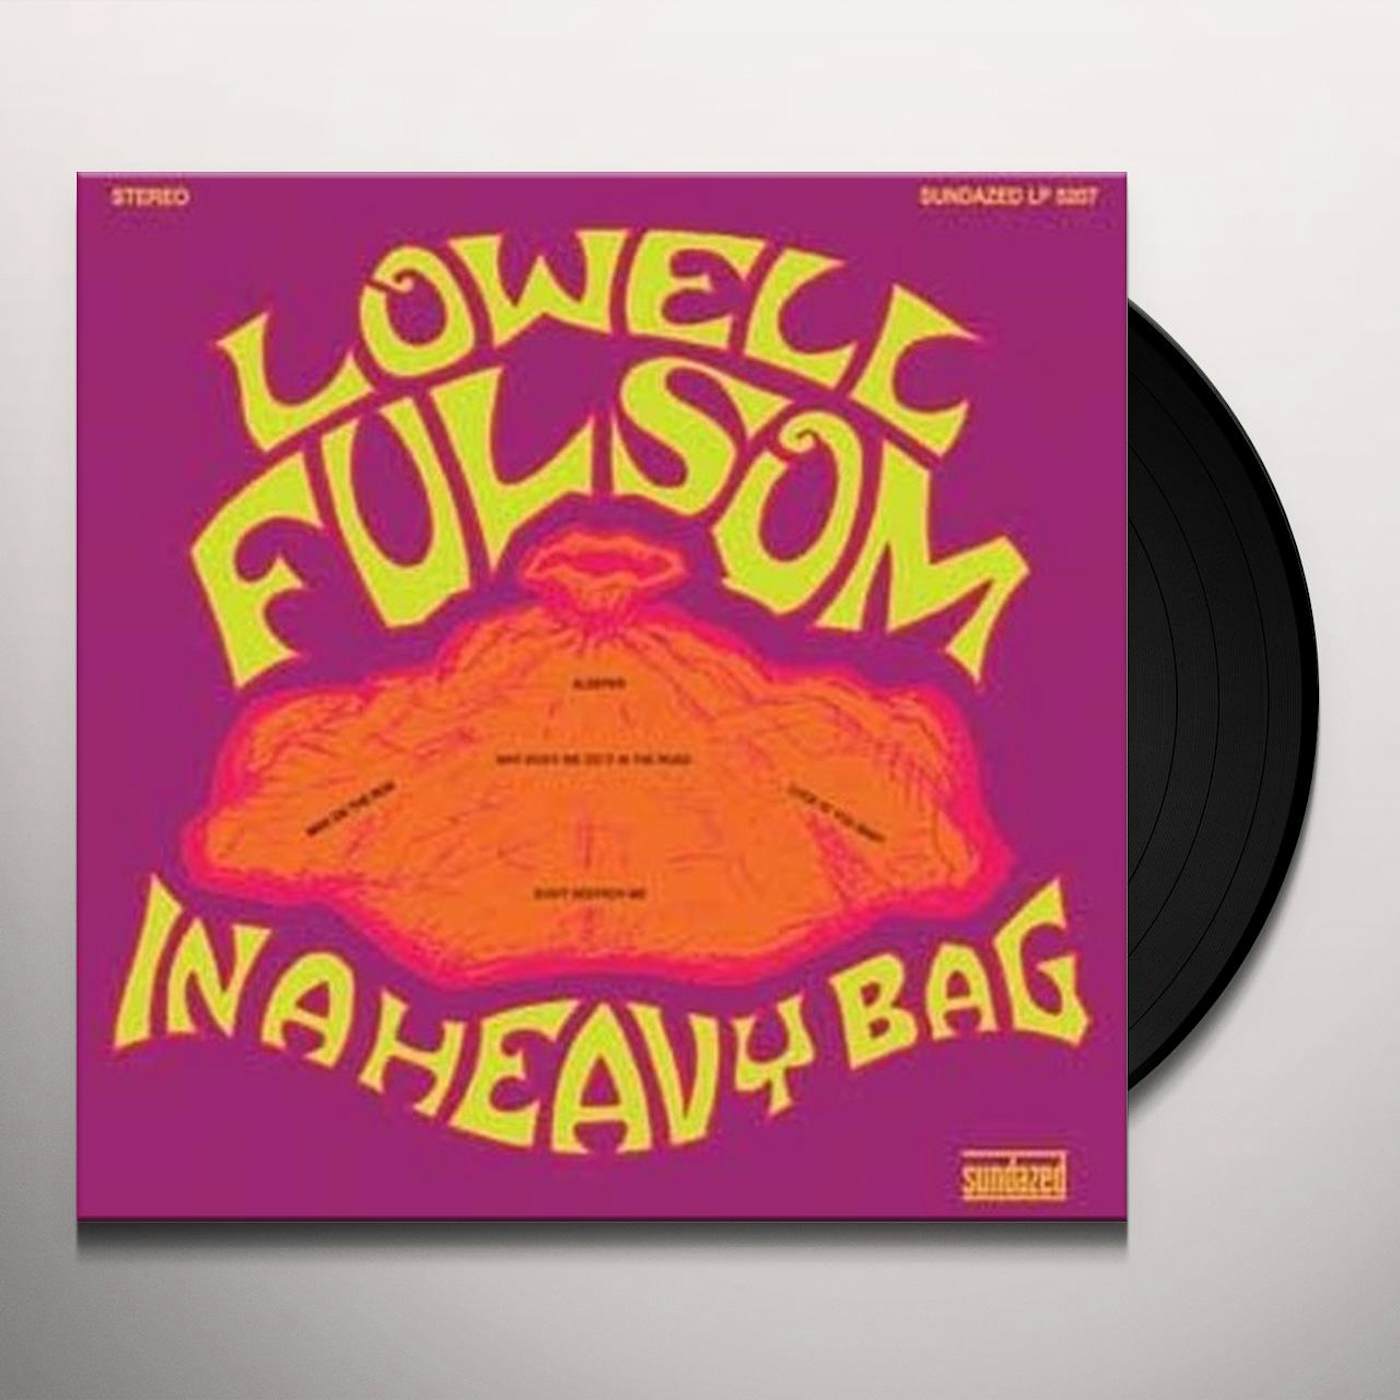 Lowell Fulson In A Heavy Bag Vinyl Record